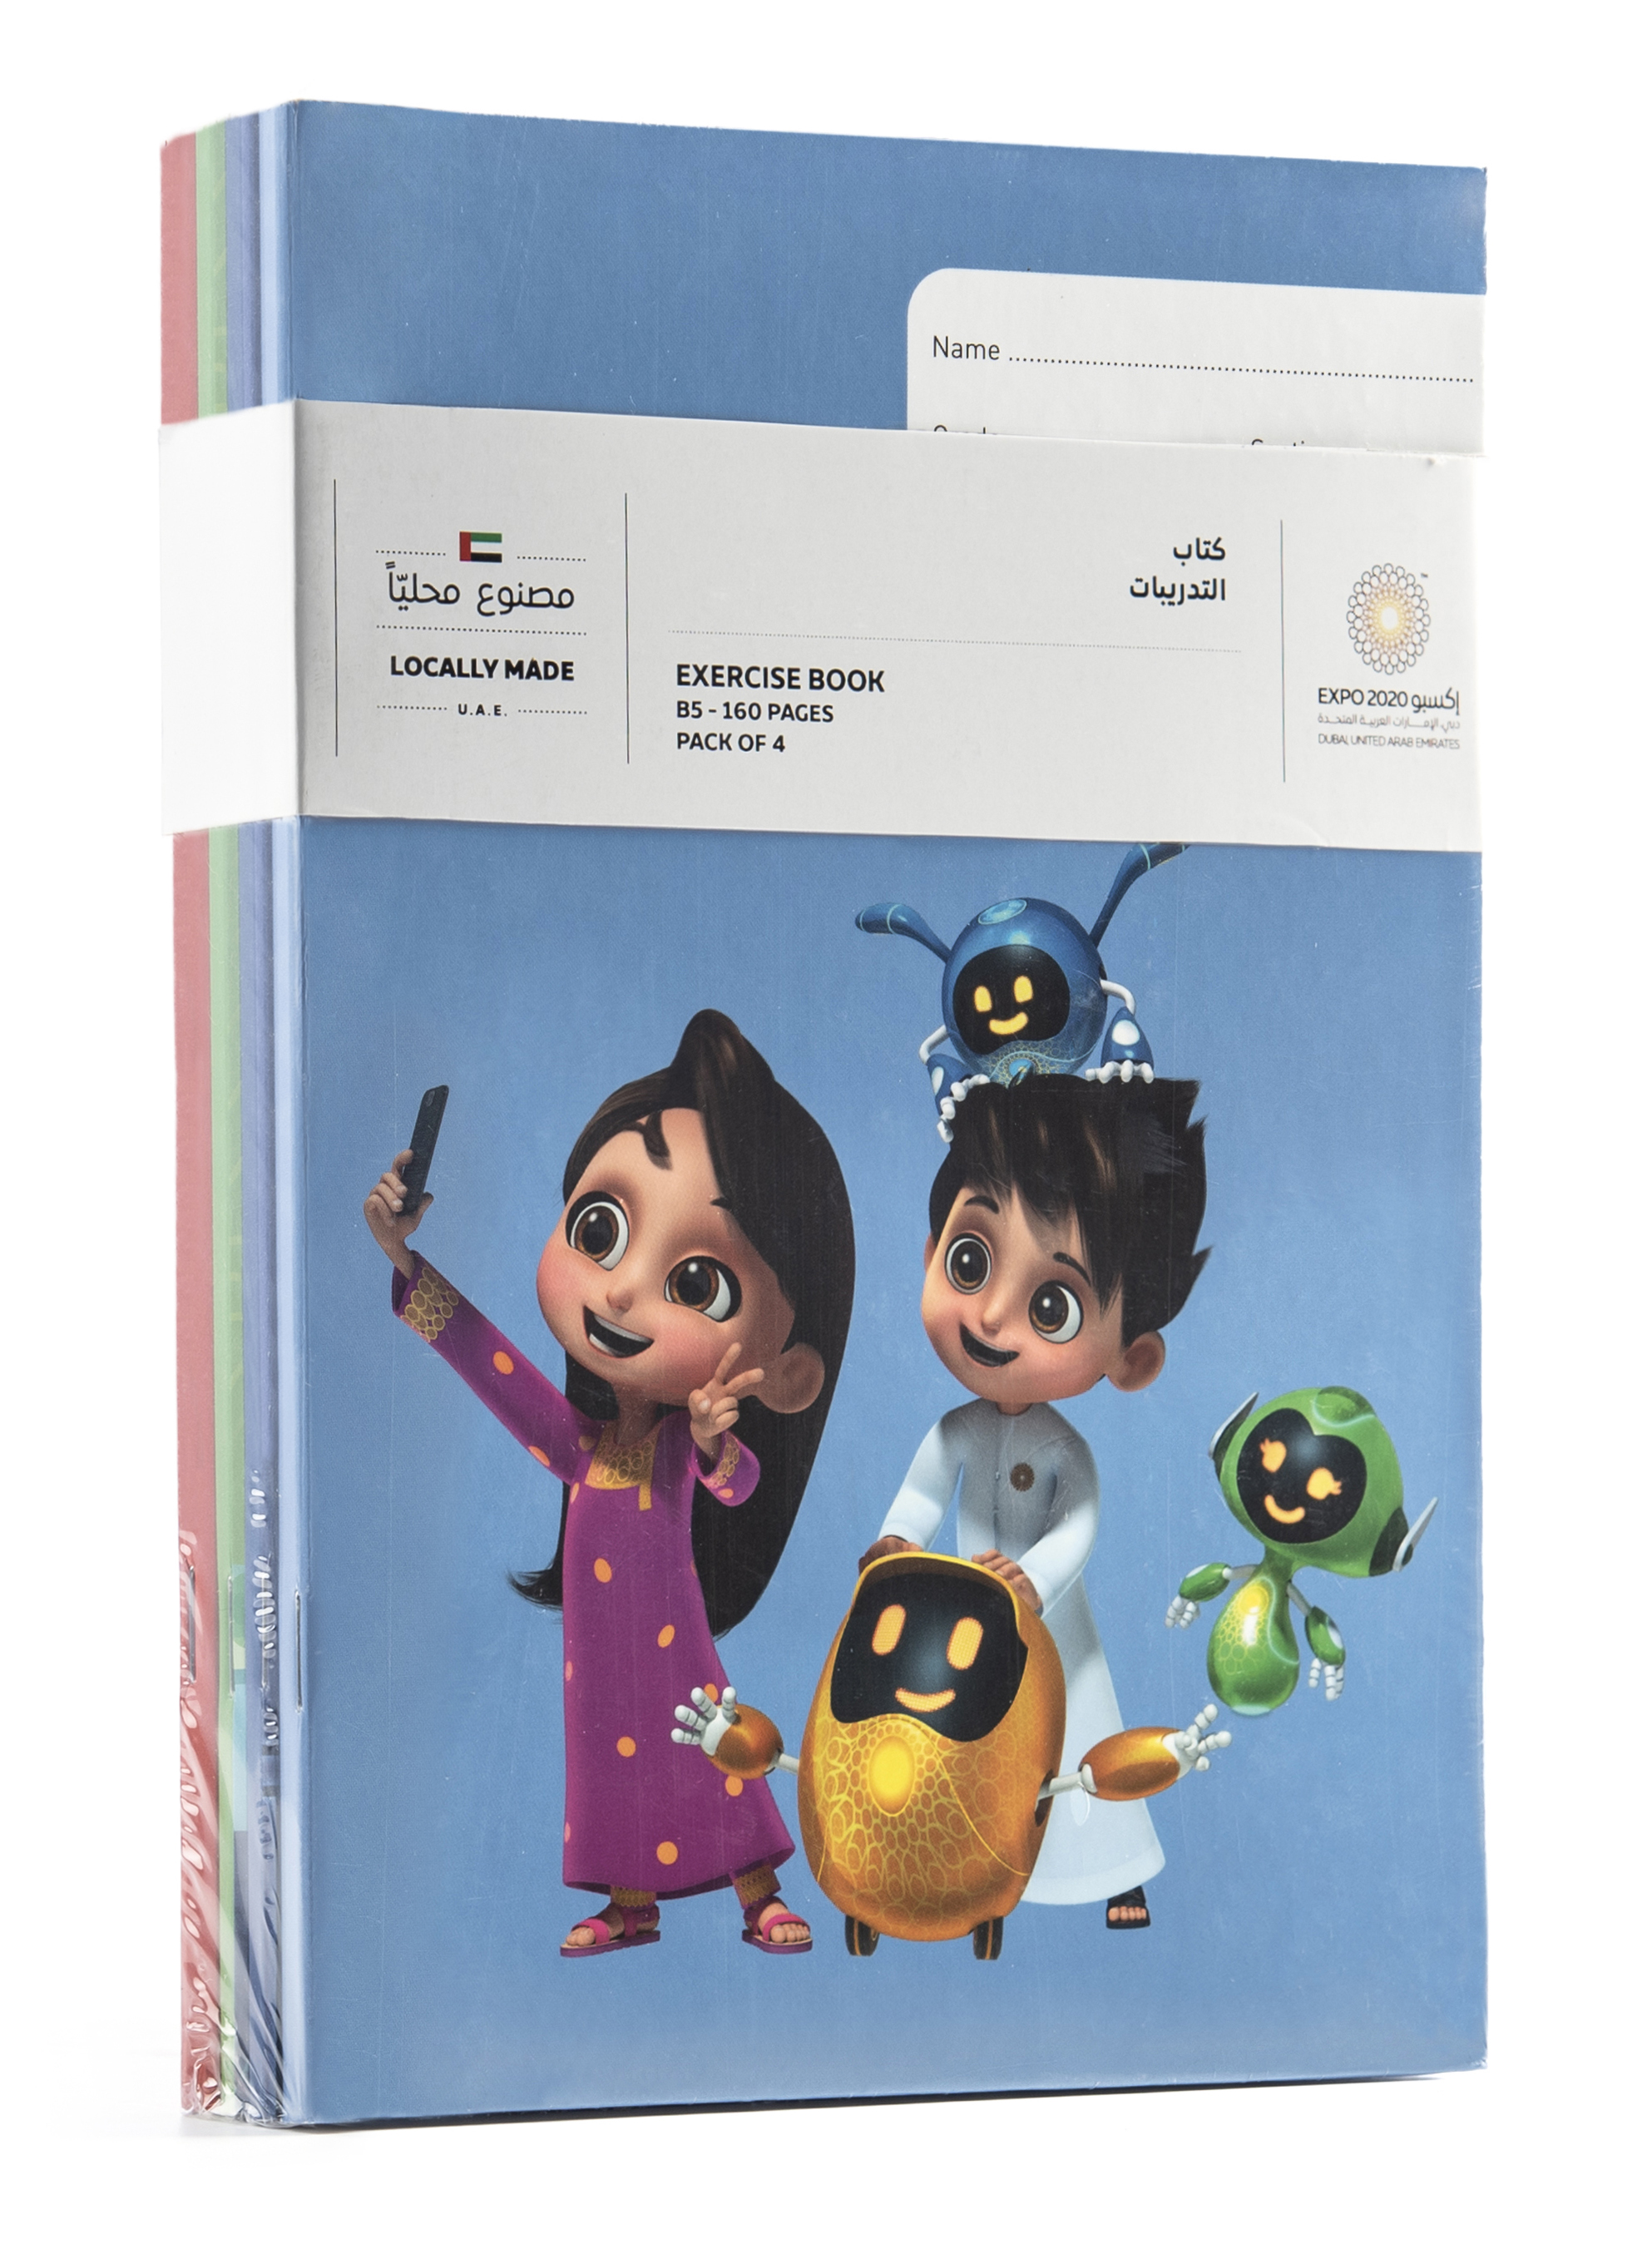 Expo 2020 Dubai Mascots Family B5 Exercise Books Pack of 4 - 160 Pages